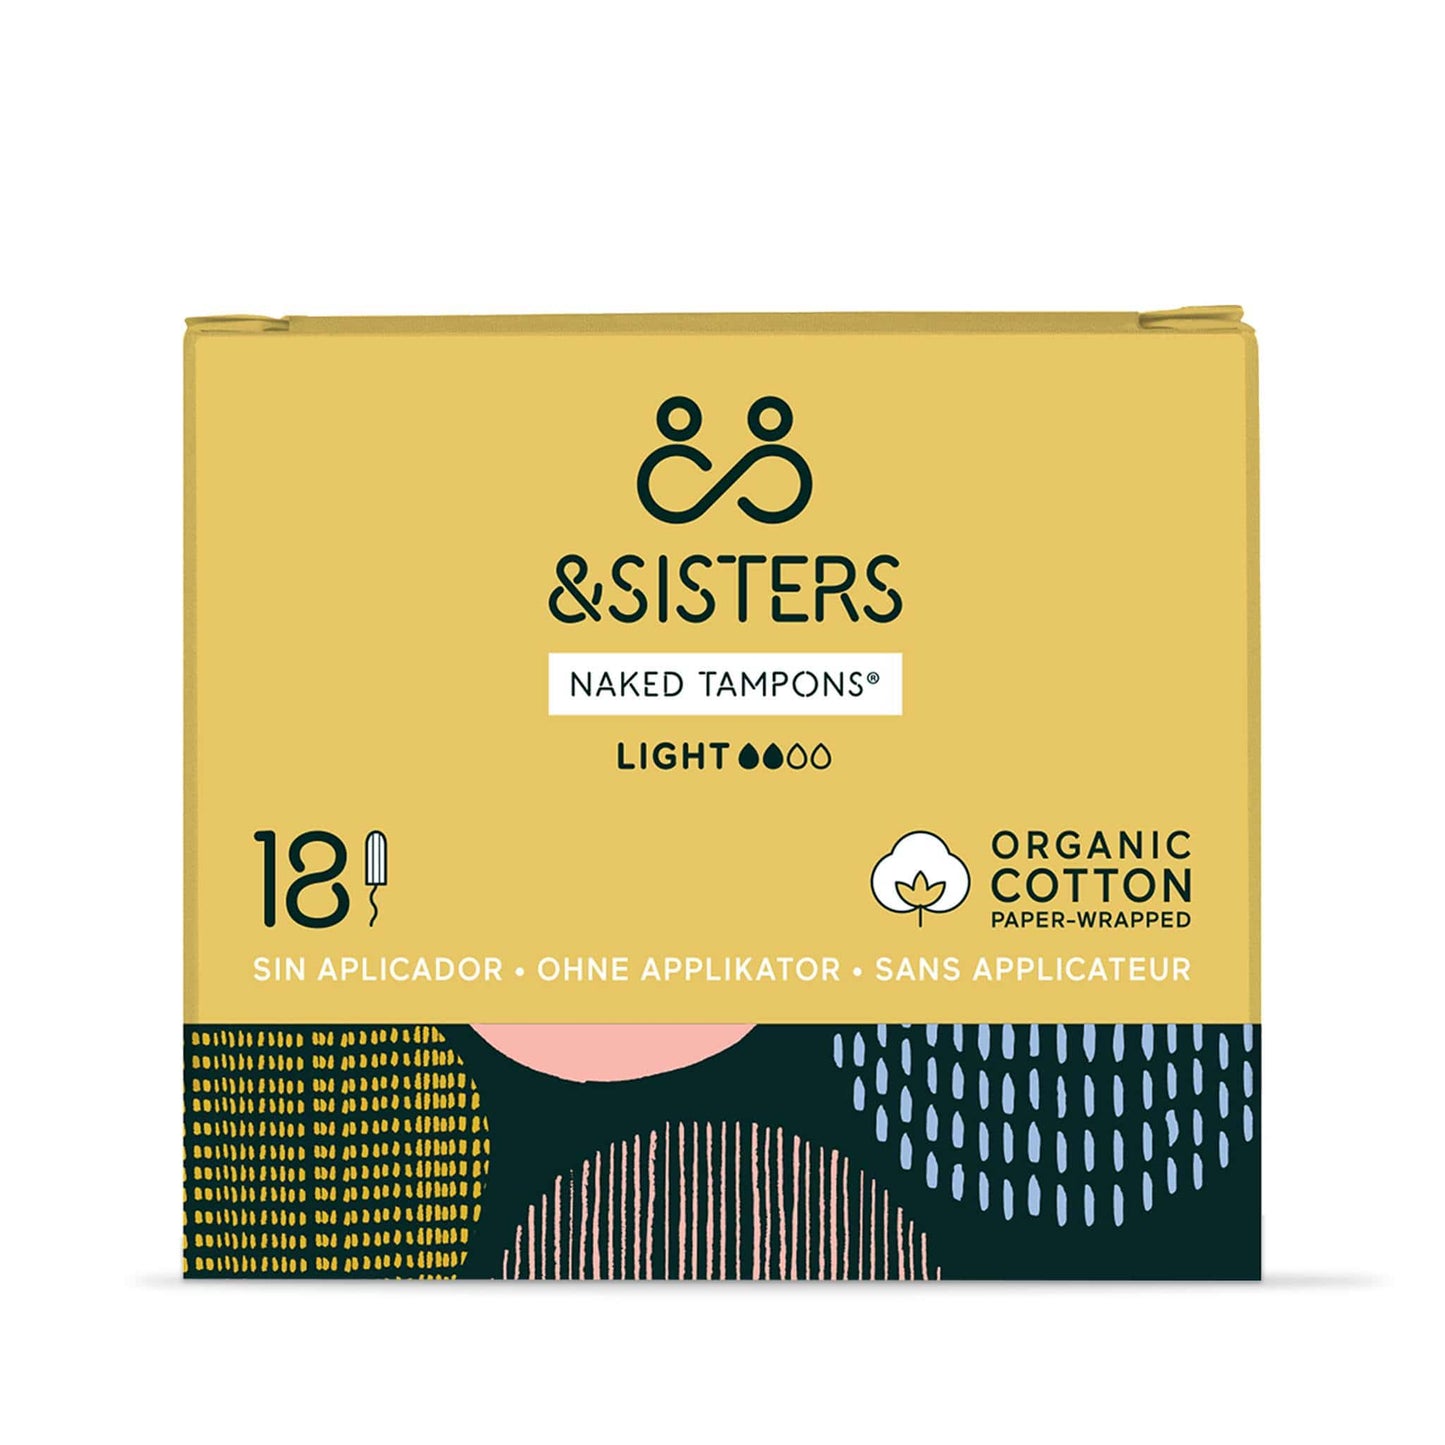 & SISTERS Tampons Light Naked Tampons - Plastic-Free and Organic Cotton - & SISTERS